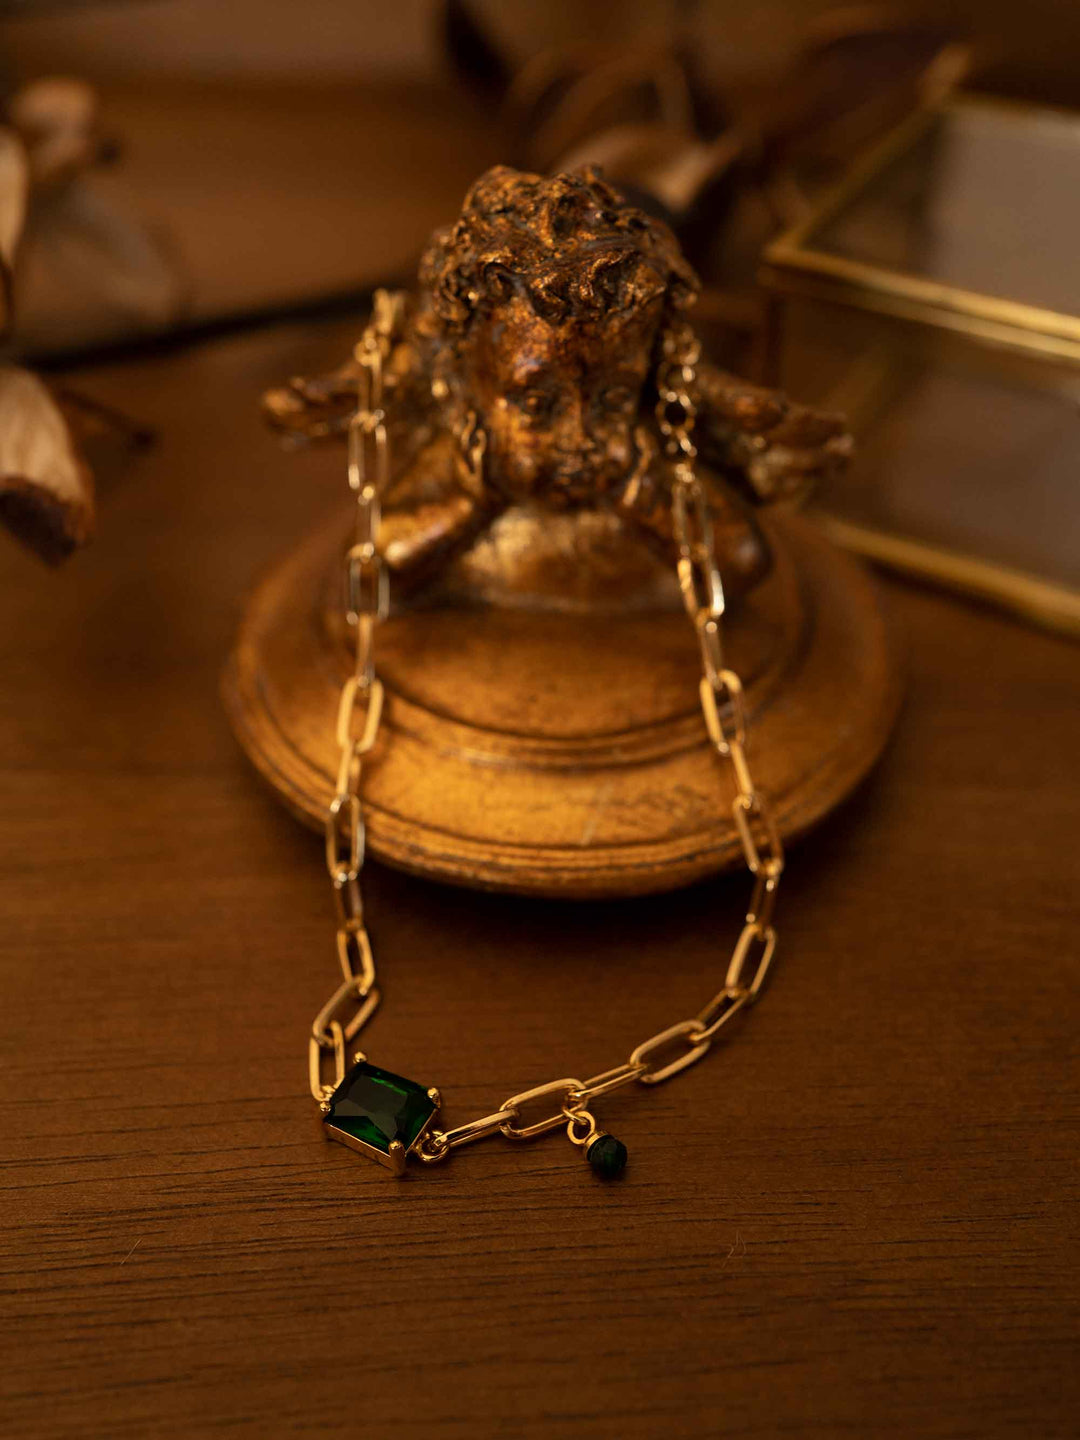 A bracelet with green stones